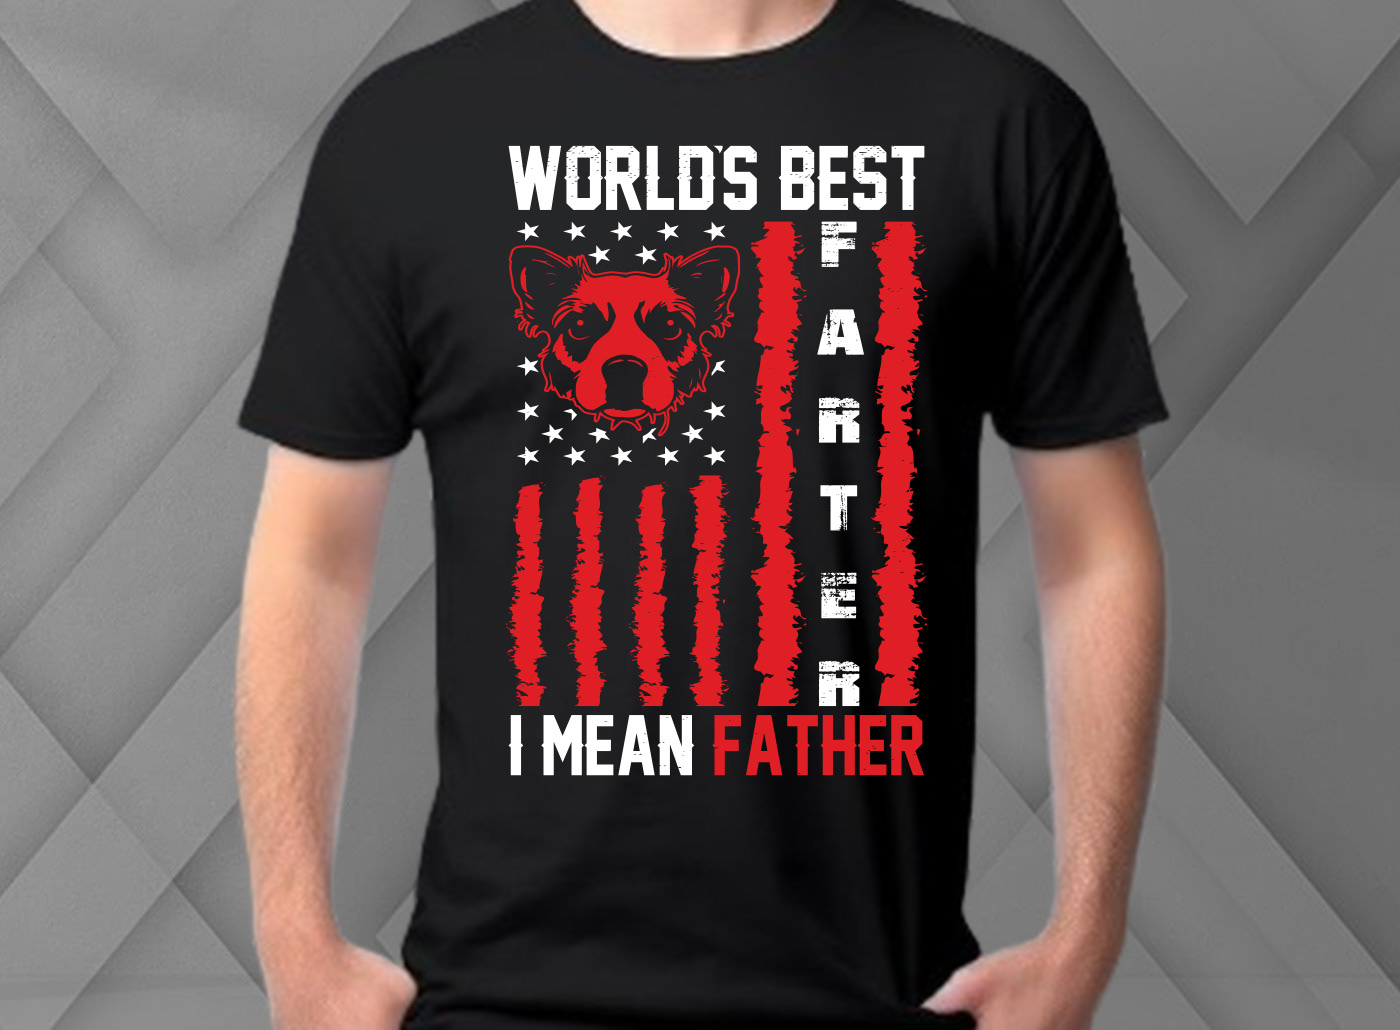 Custom T-Shirt Design For Your Own Business.